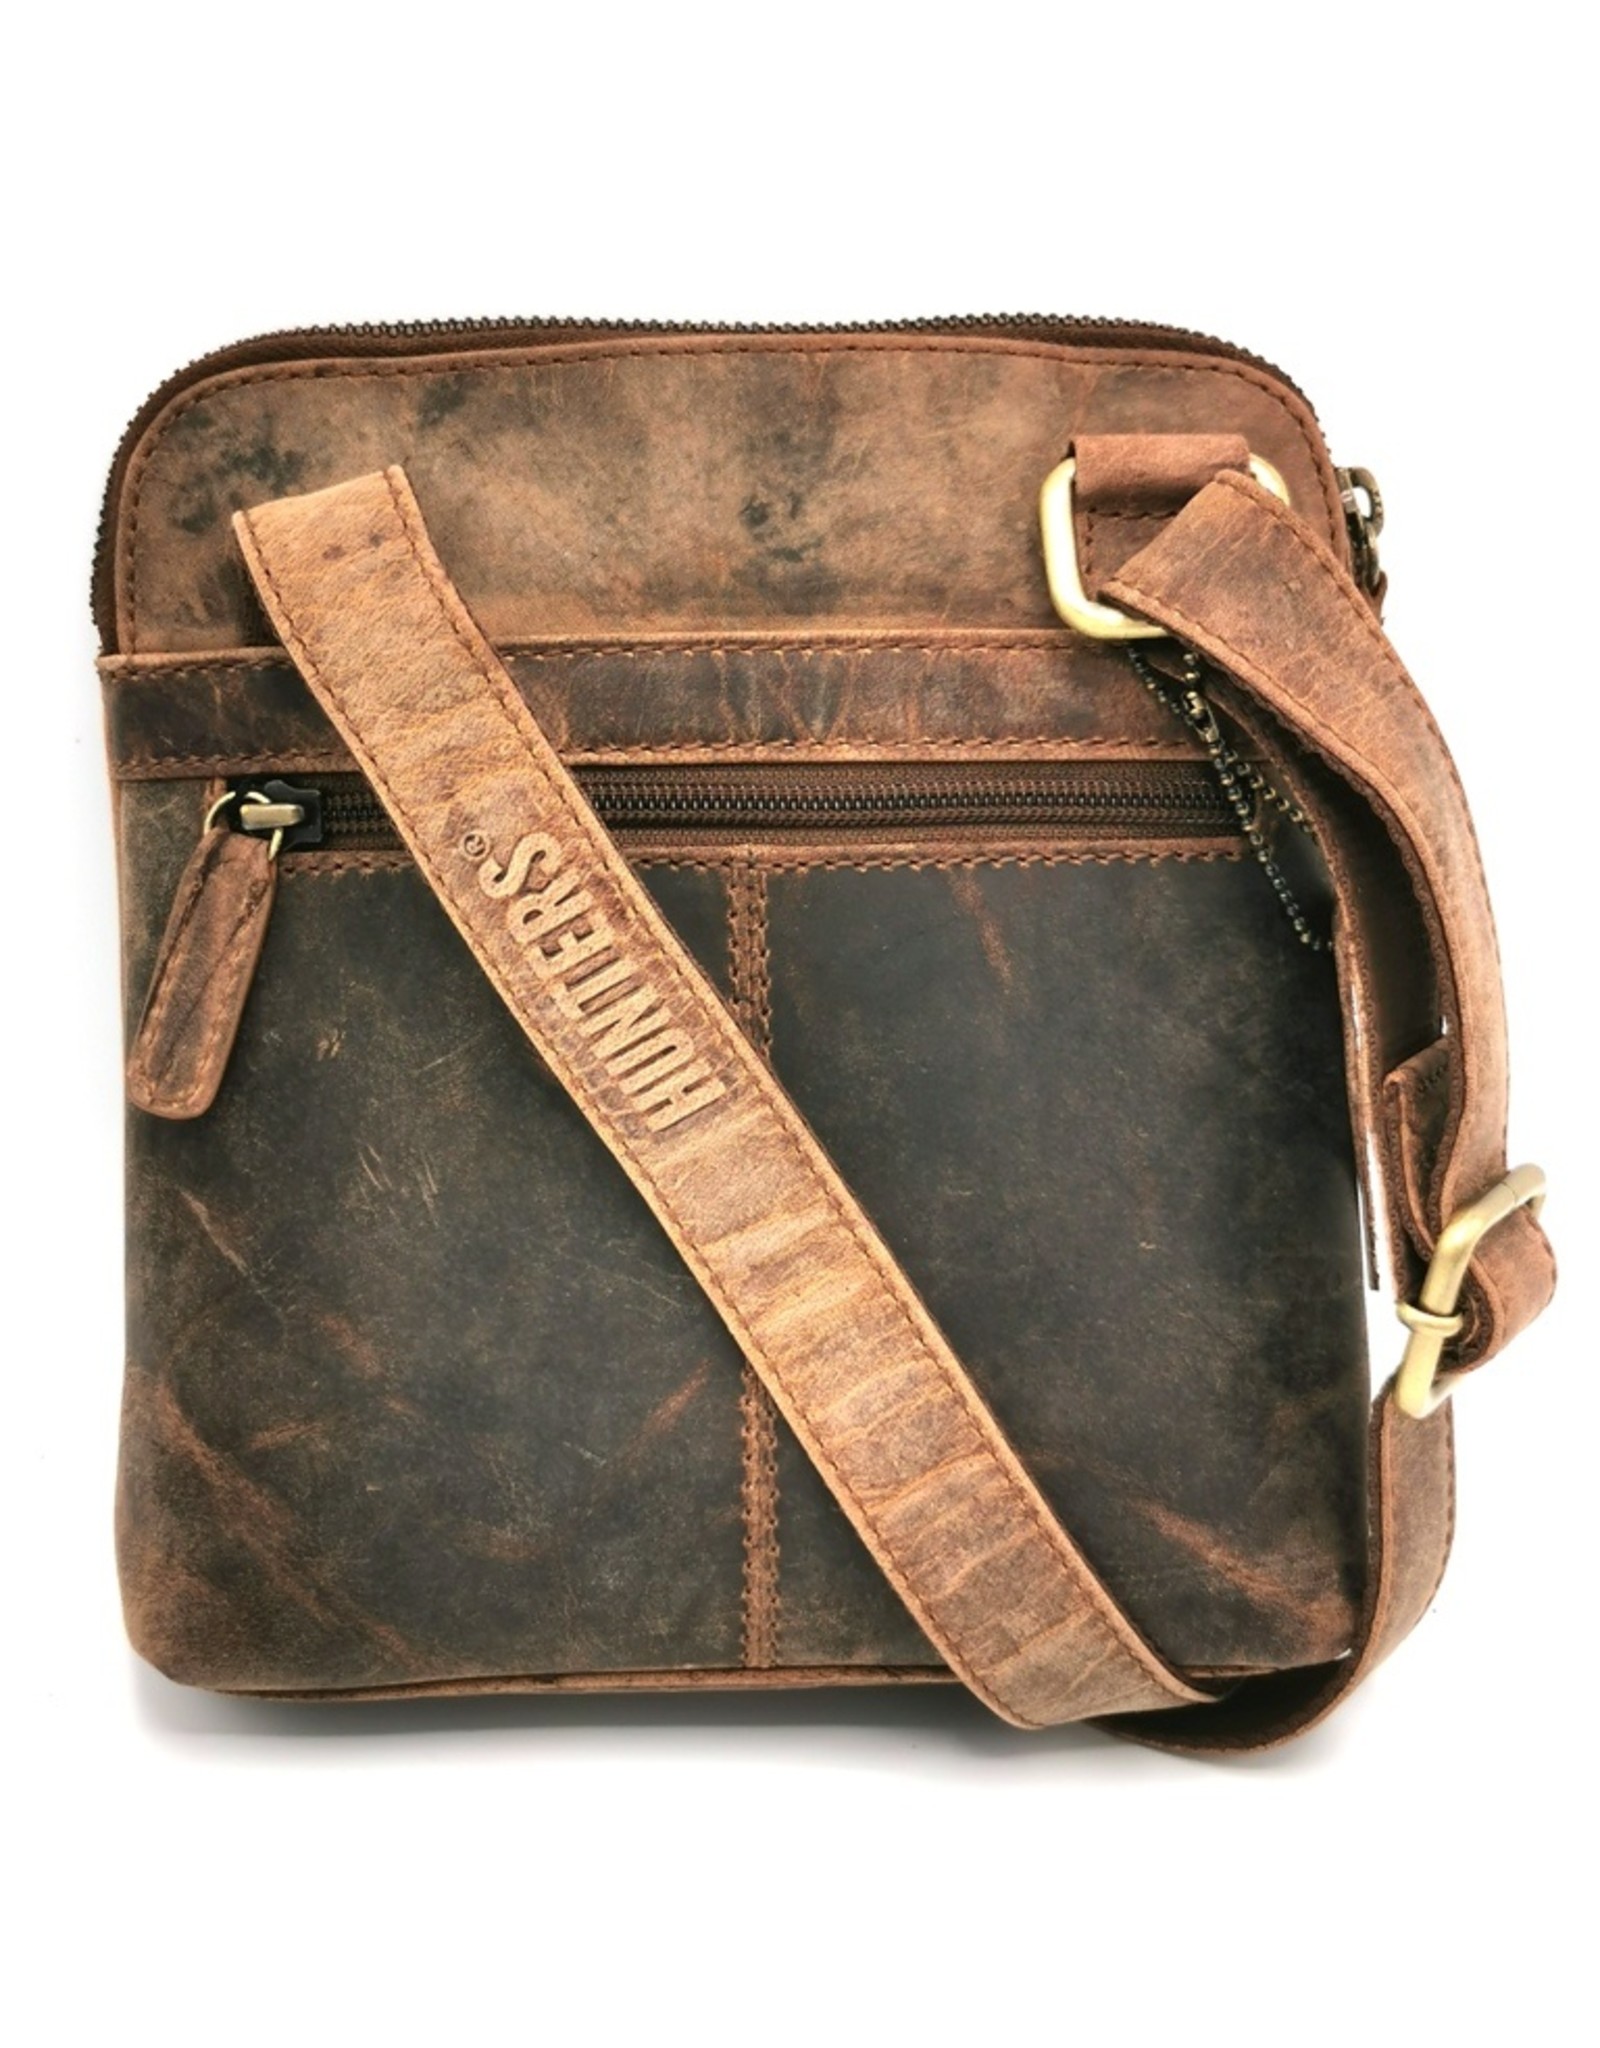 Hunters Leather bags - Hunters shoulder bag buffalo leather small